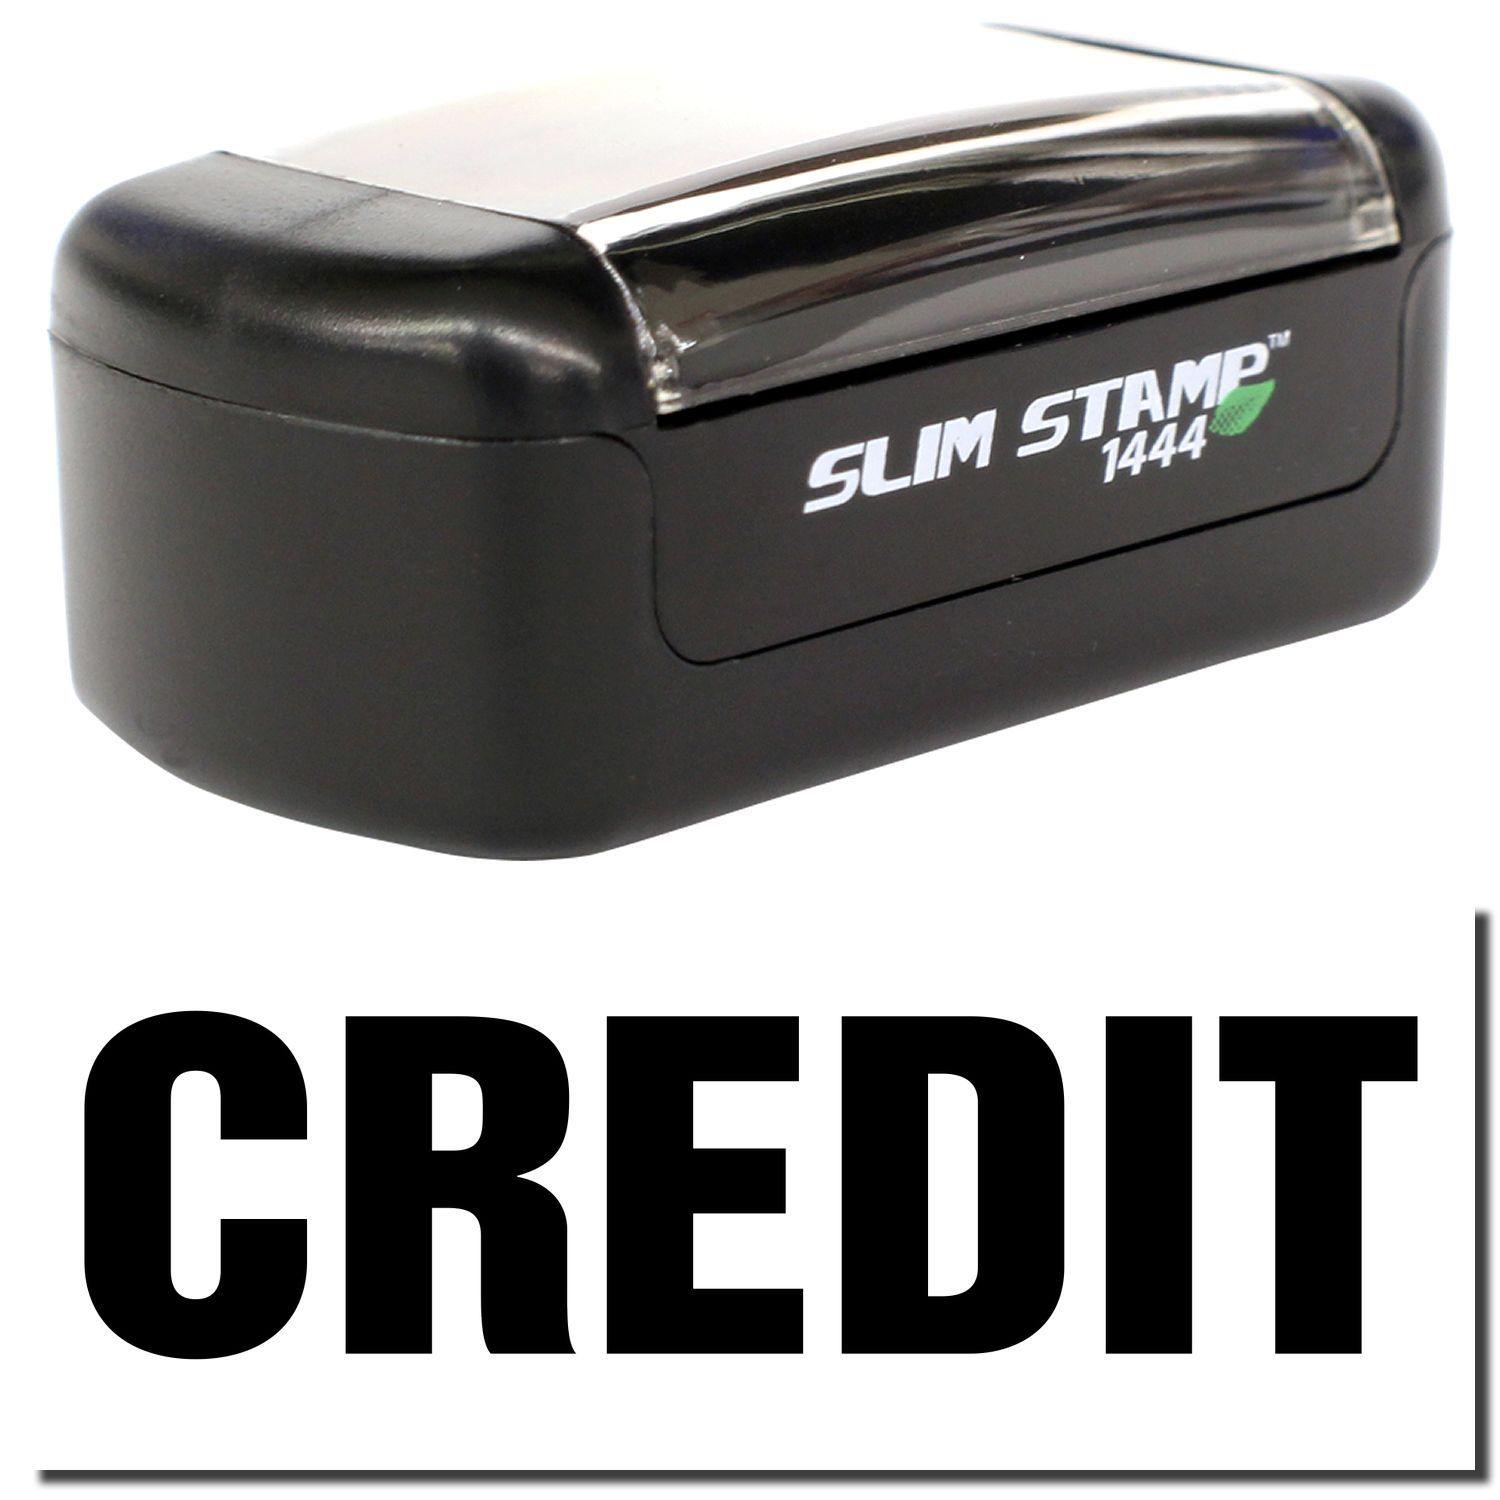 A stock office pre-inked stamp with a stamped image showing how the text "CREDIT" in bold font is displayed after stamping.